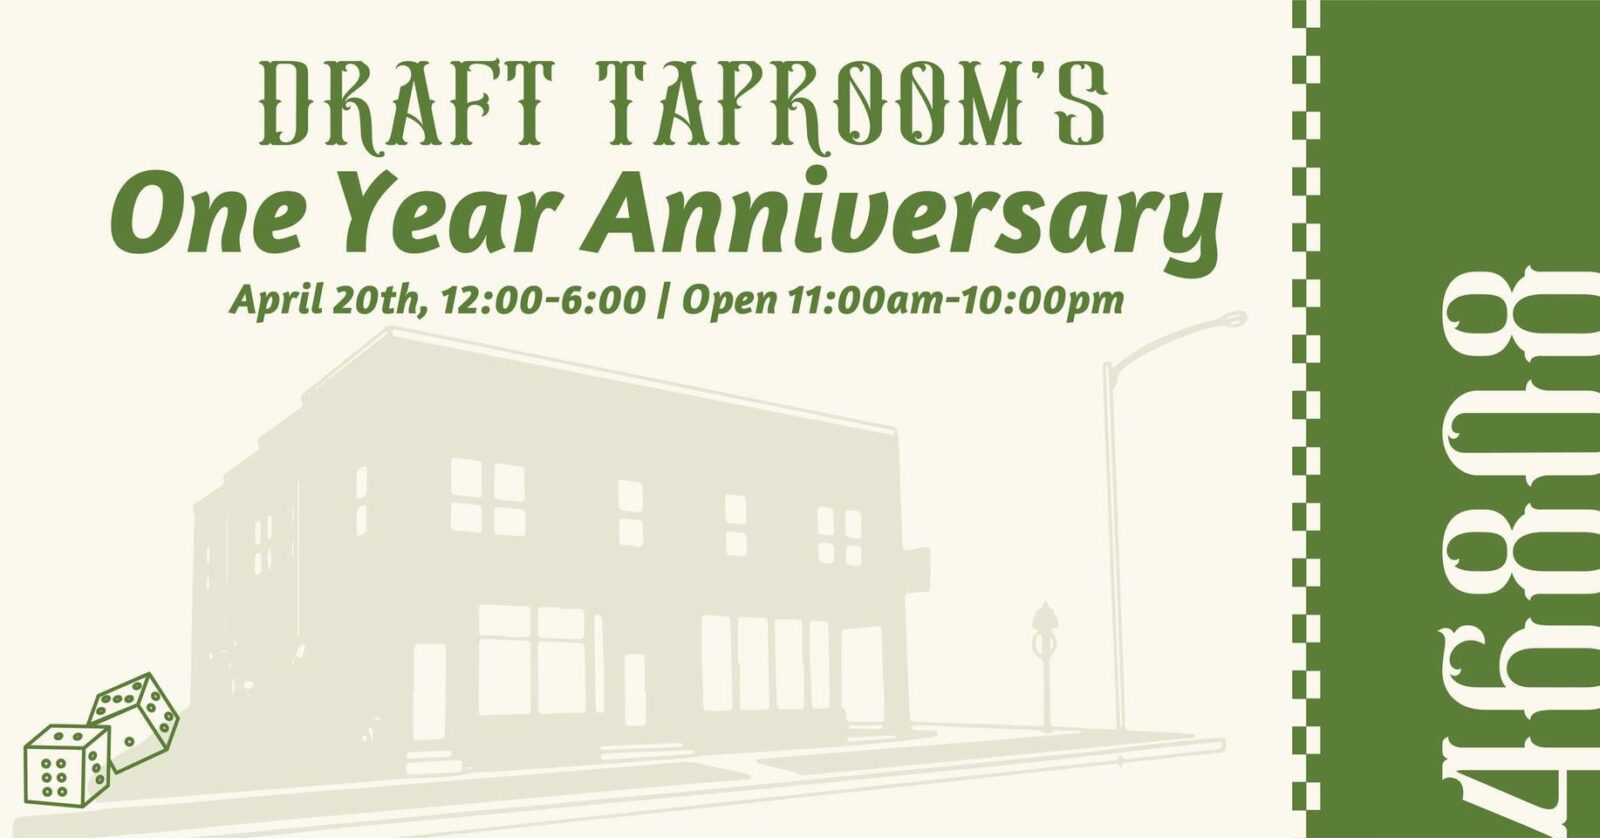 Draft Taprooms one year anniversary